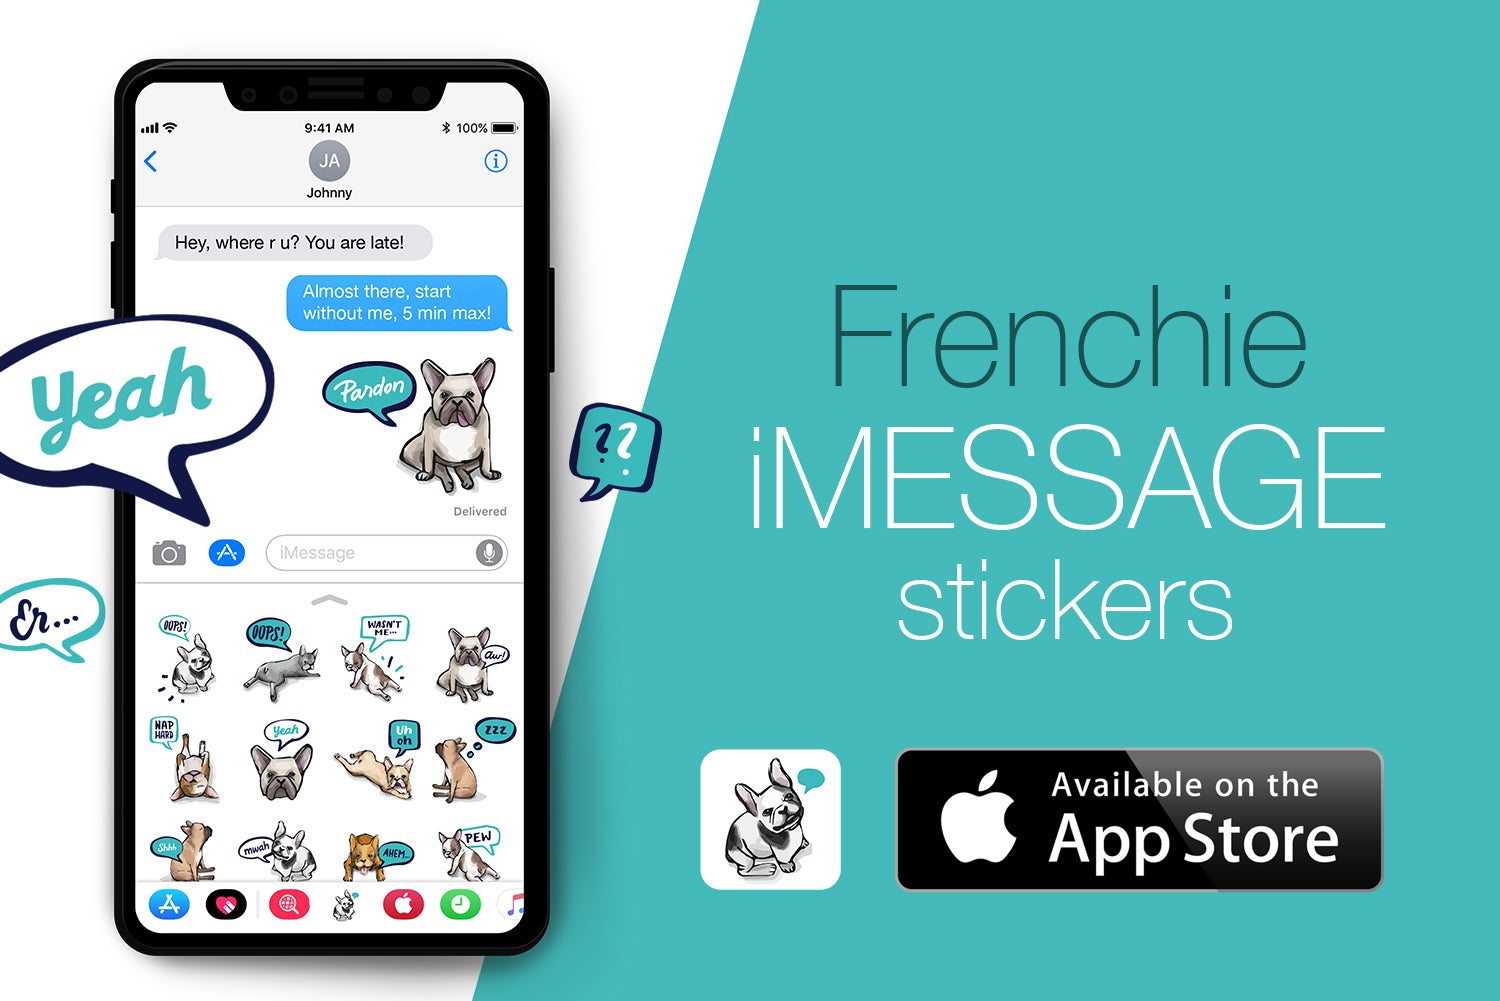 Frenchie for iMessage